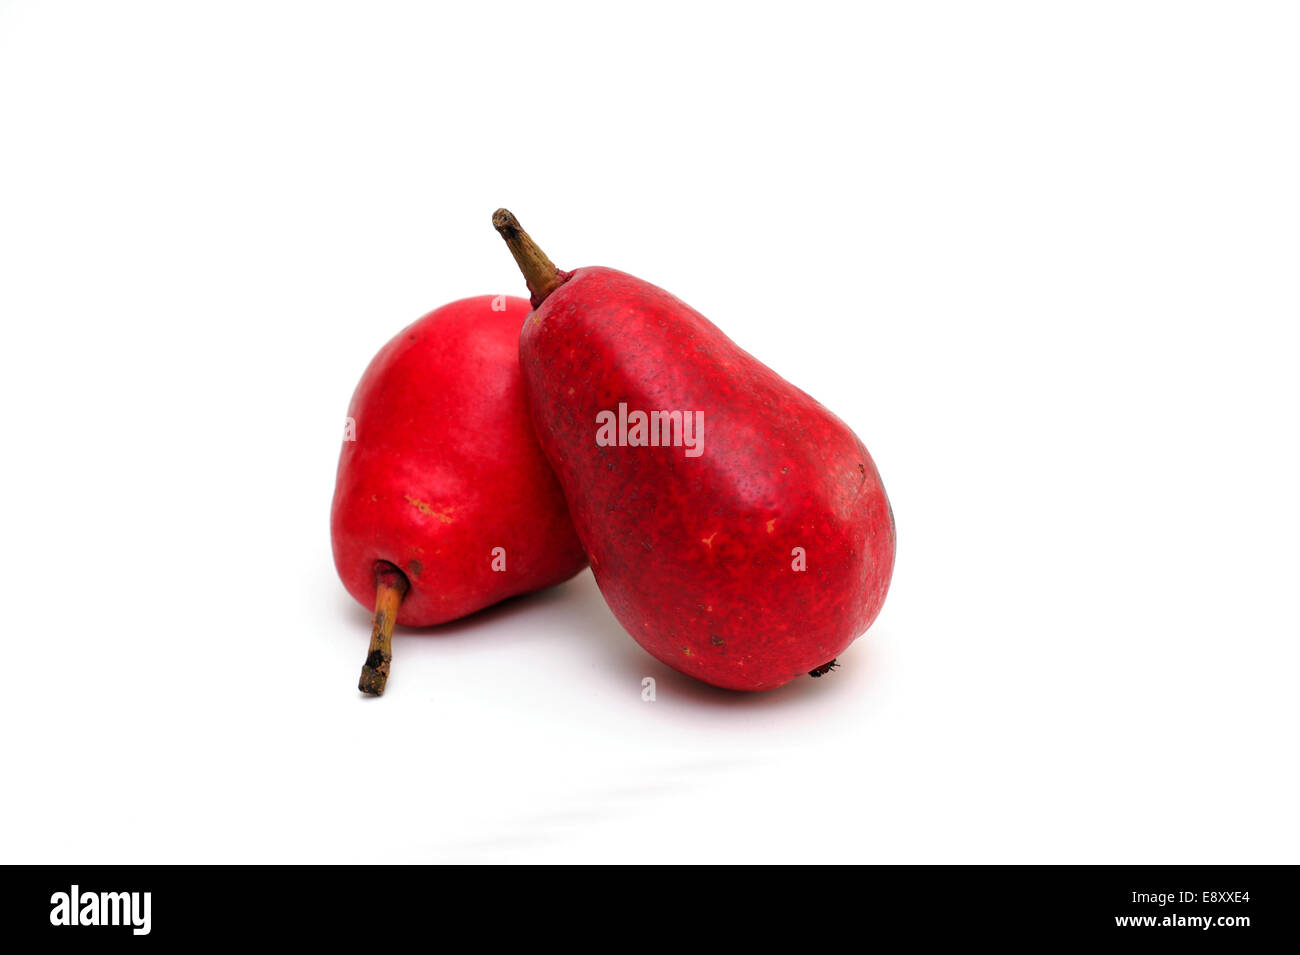 Red Pear Stock Photo